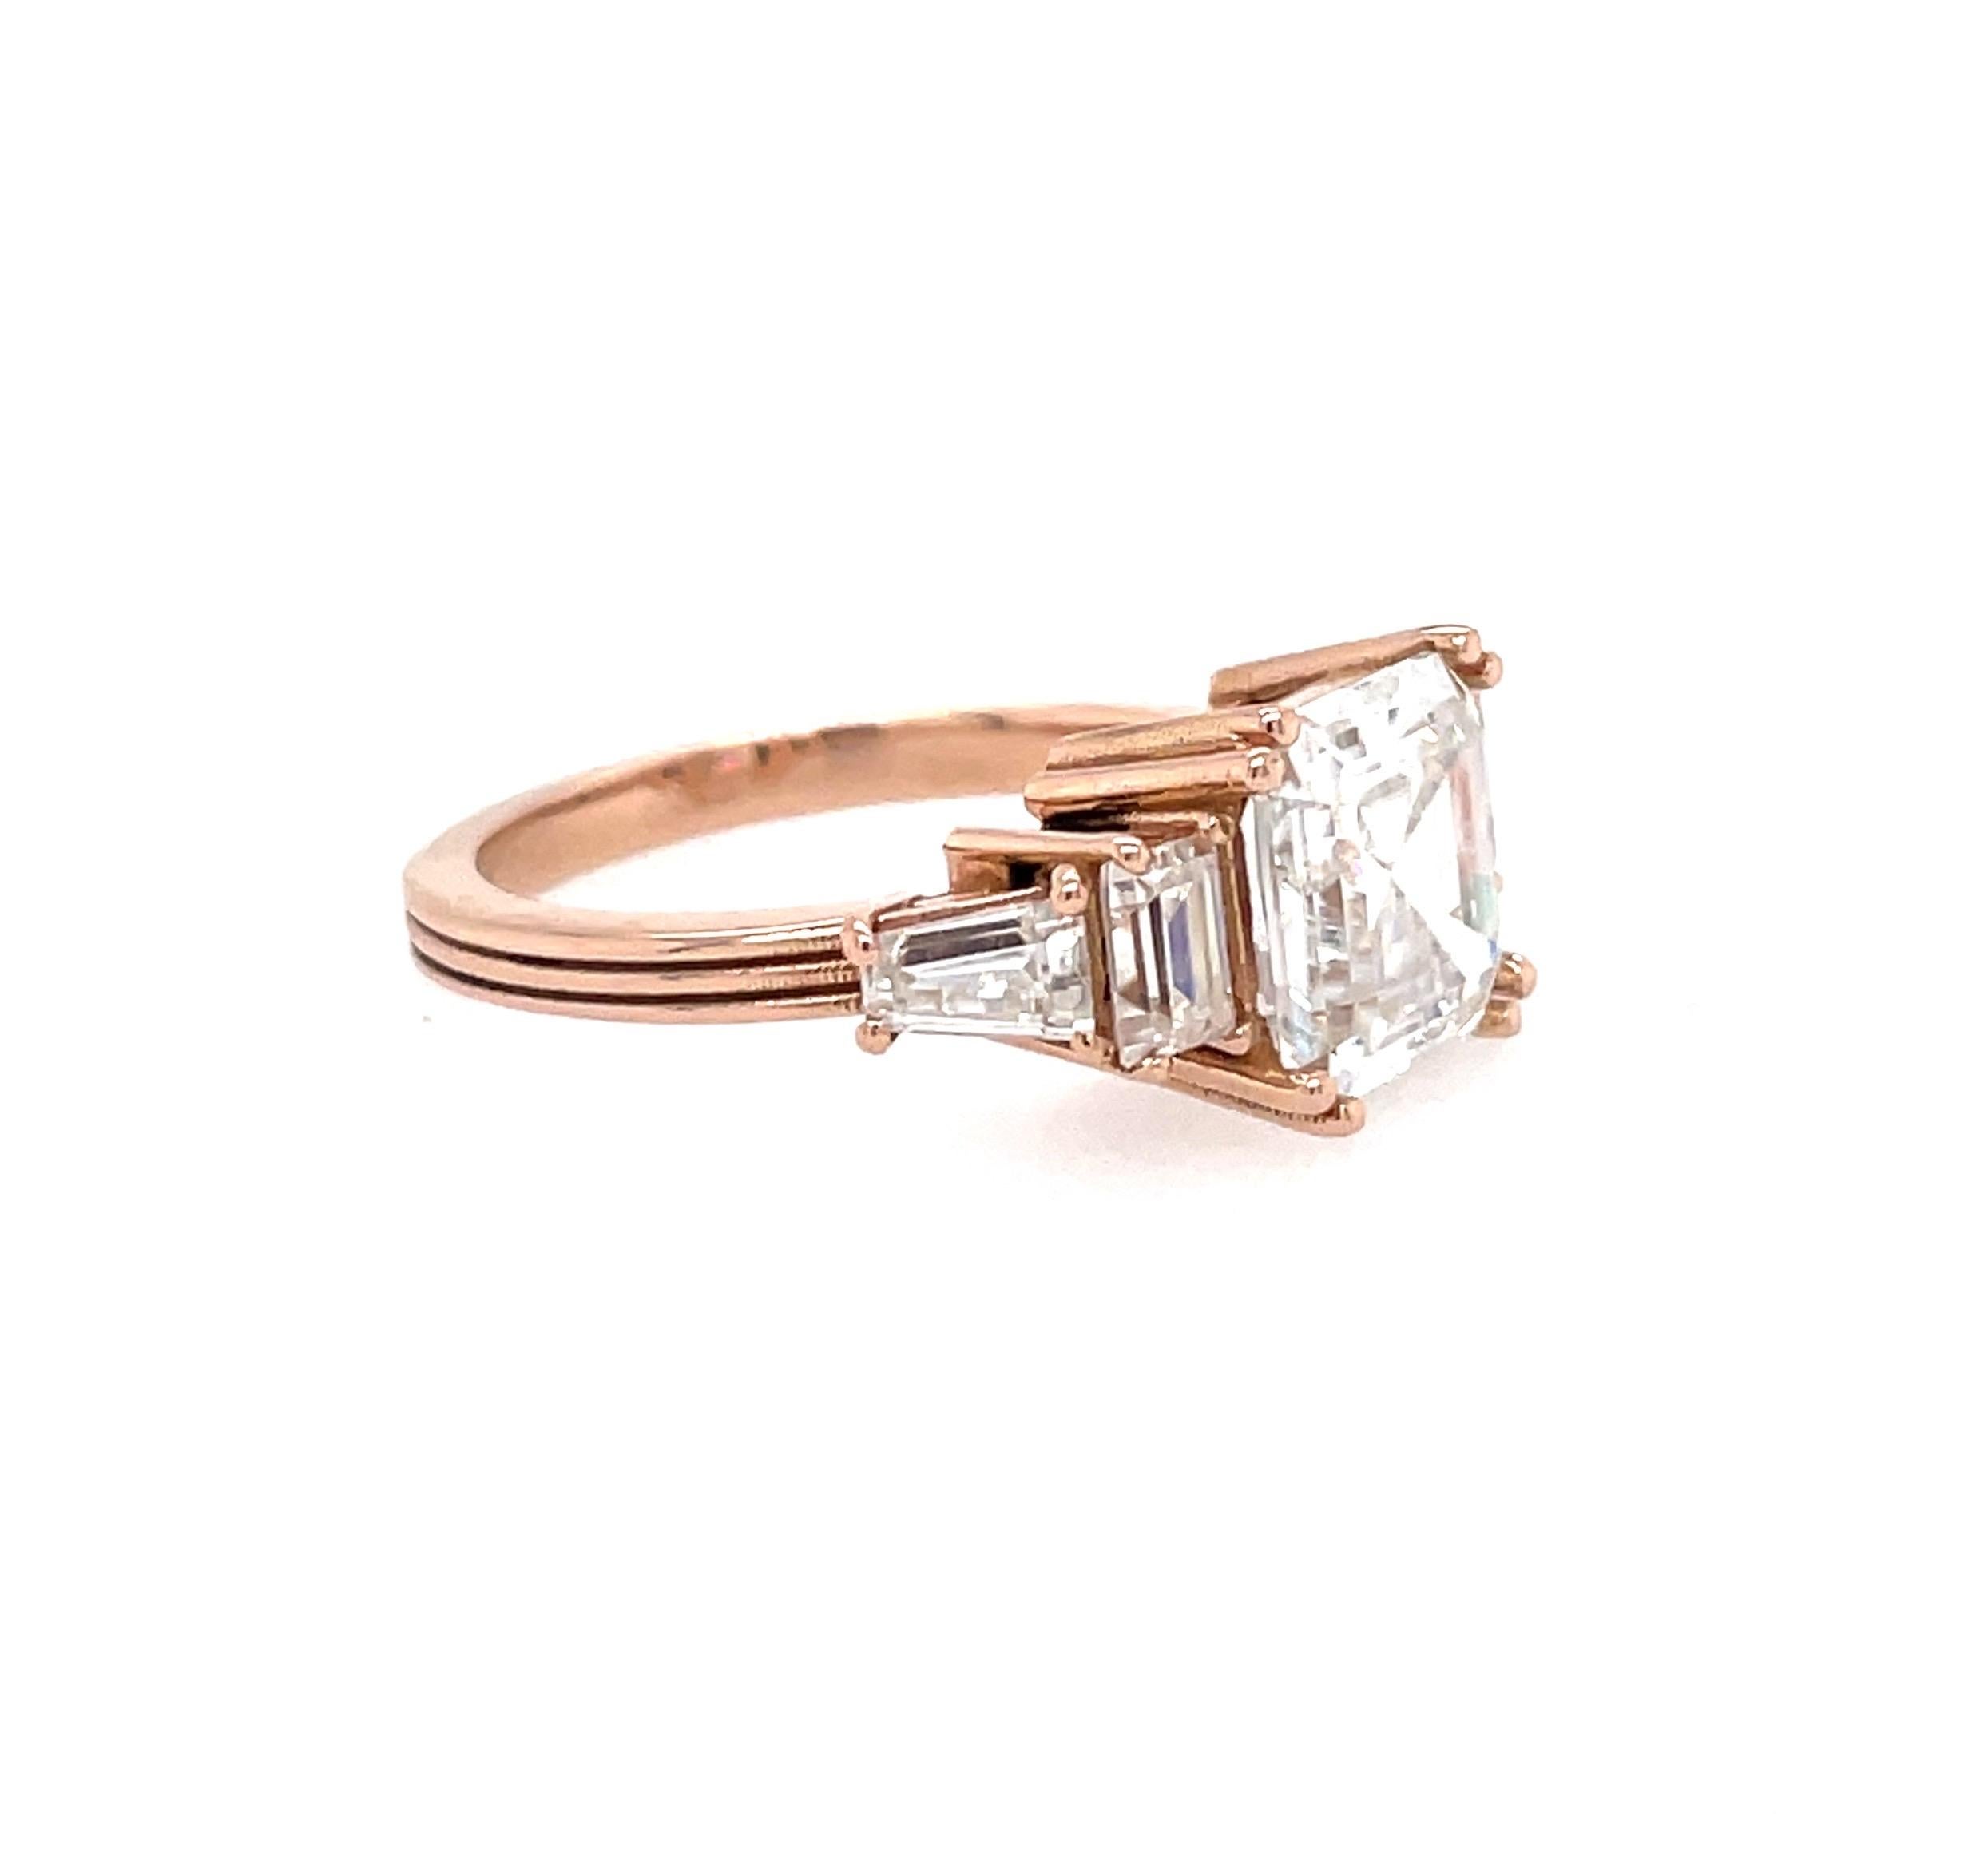 This Art Deco inspired Asscher cut engagement ring features a 2.20ct Forever One moissanite with eagle claw prongs, accented by sparkling 1.00ct custom cut moissanite baguettes. The eagle claw prongs keep the unique square shape of the Asscher,